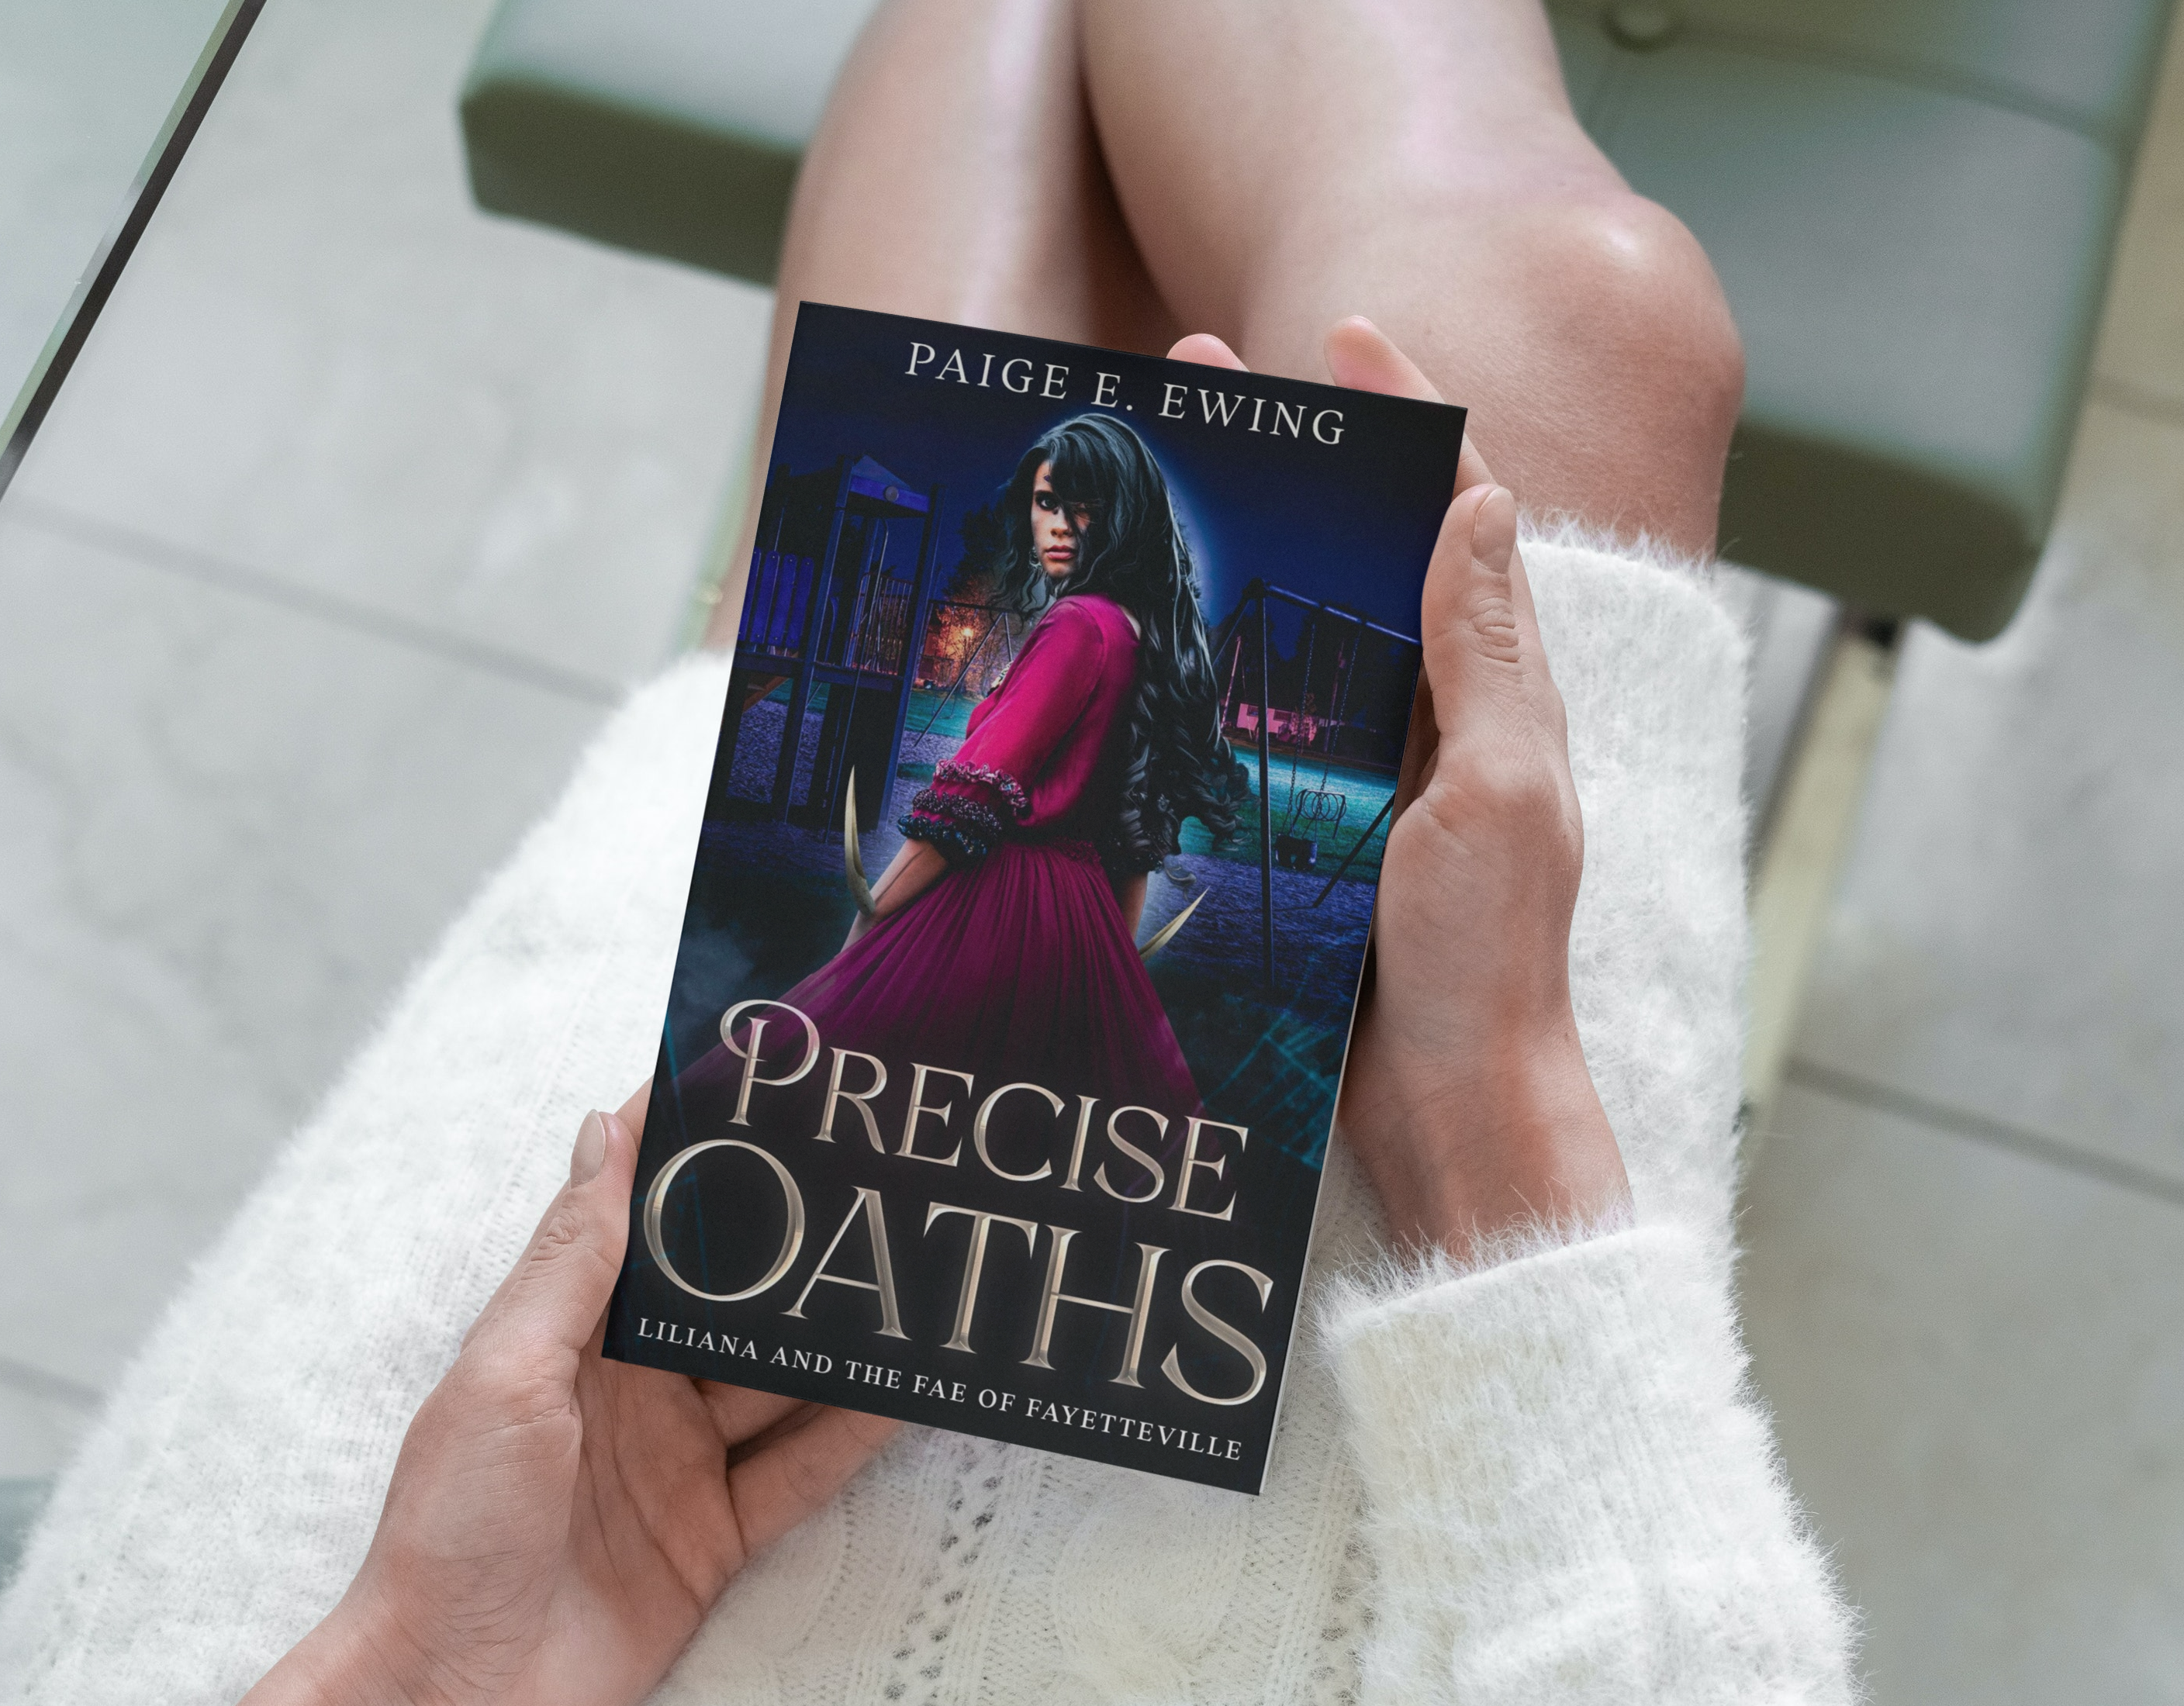 Book - Precise Oaths - in the hands of a woman wearing a white sweater dress.